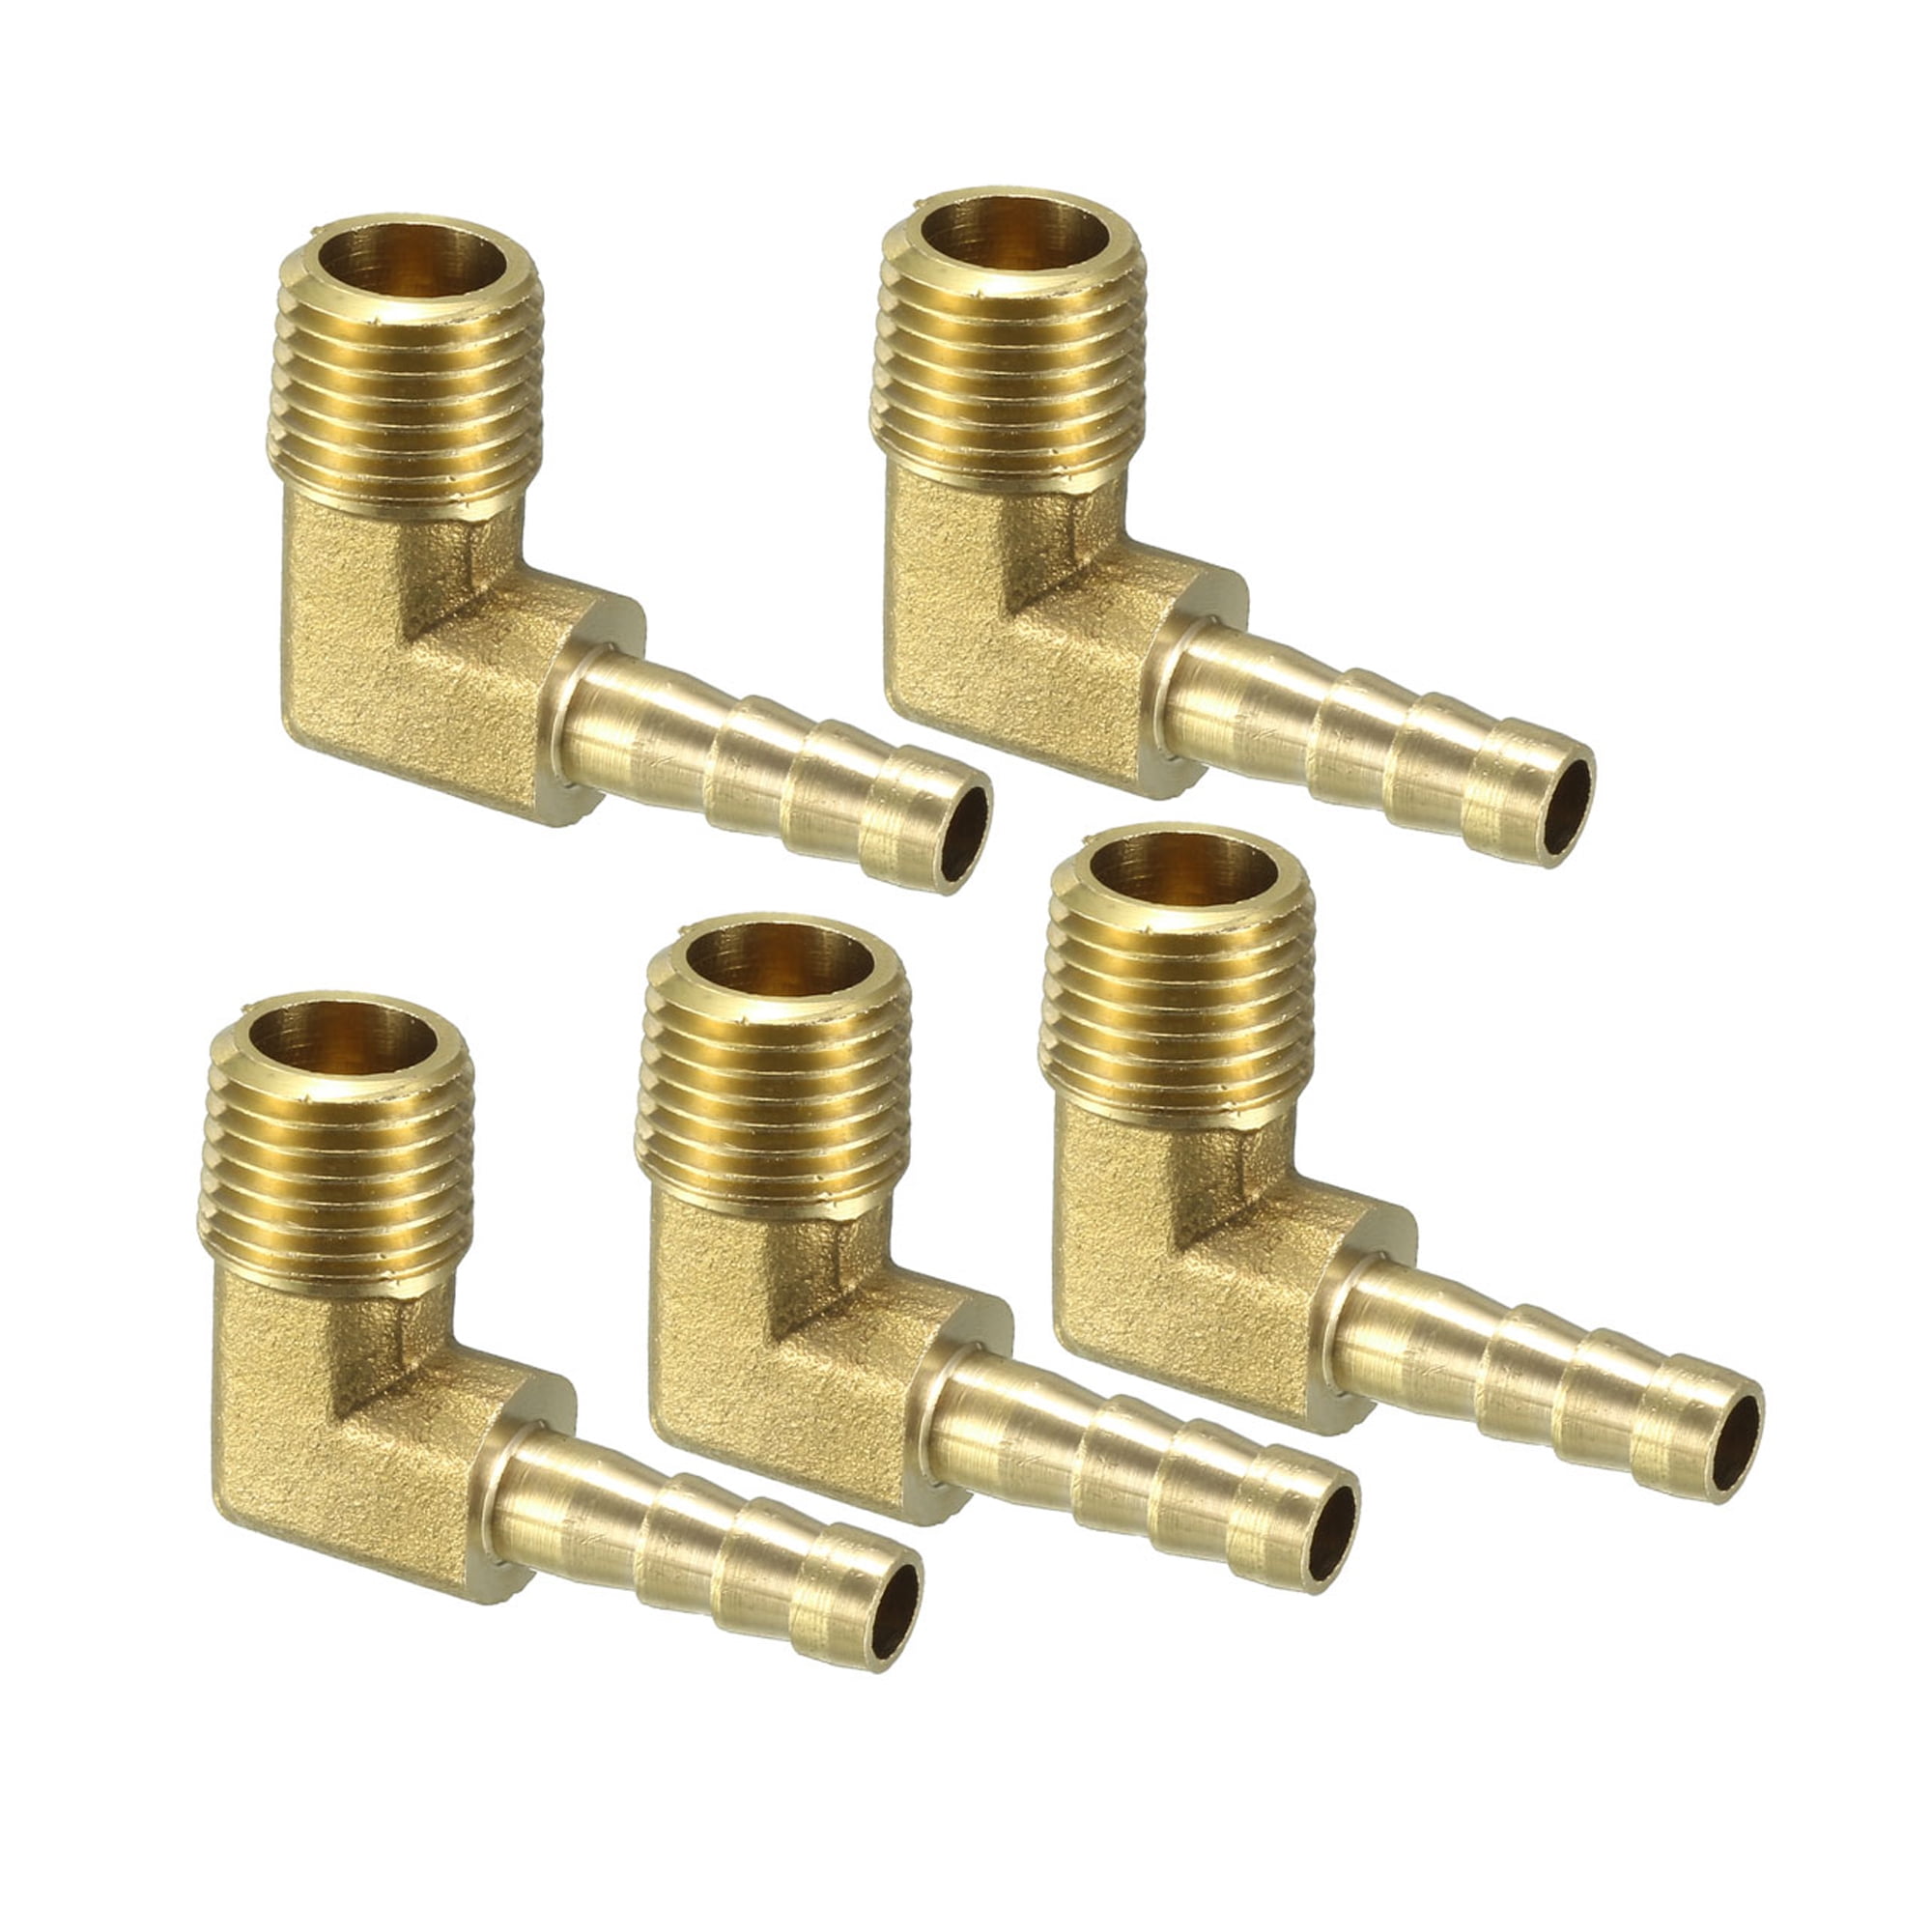 1pcs 20mm Brass Barb Splicer Mender Straight Pipe Connector Prcatical Brass Straight Barbed Connector Brass Hose Fitting for Water/Fuel/Air 